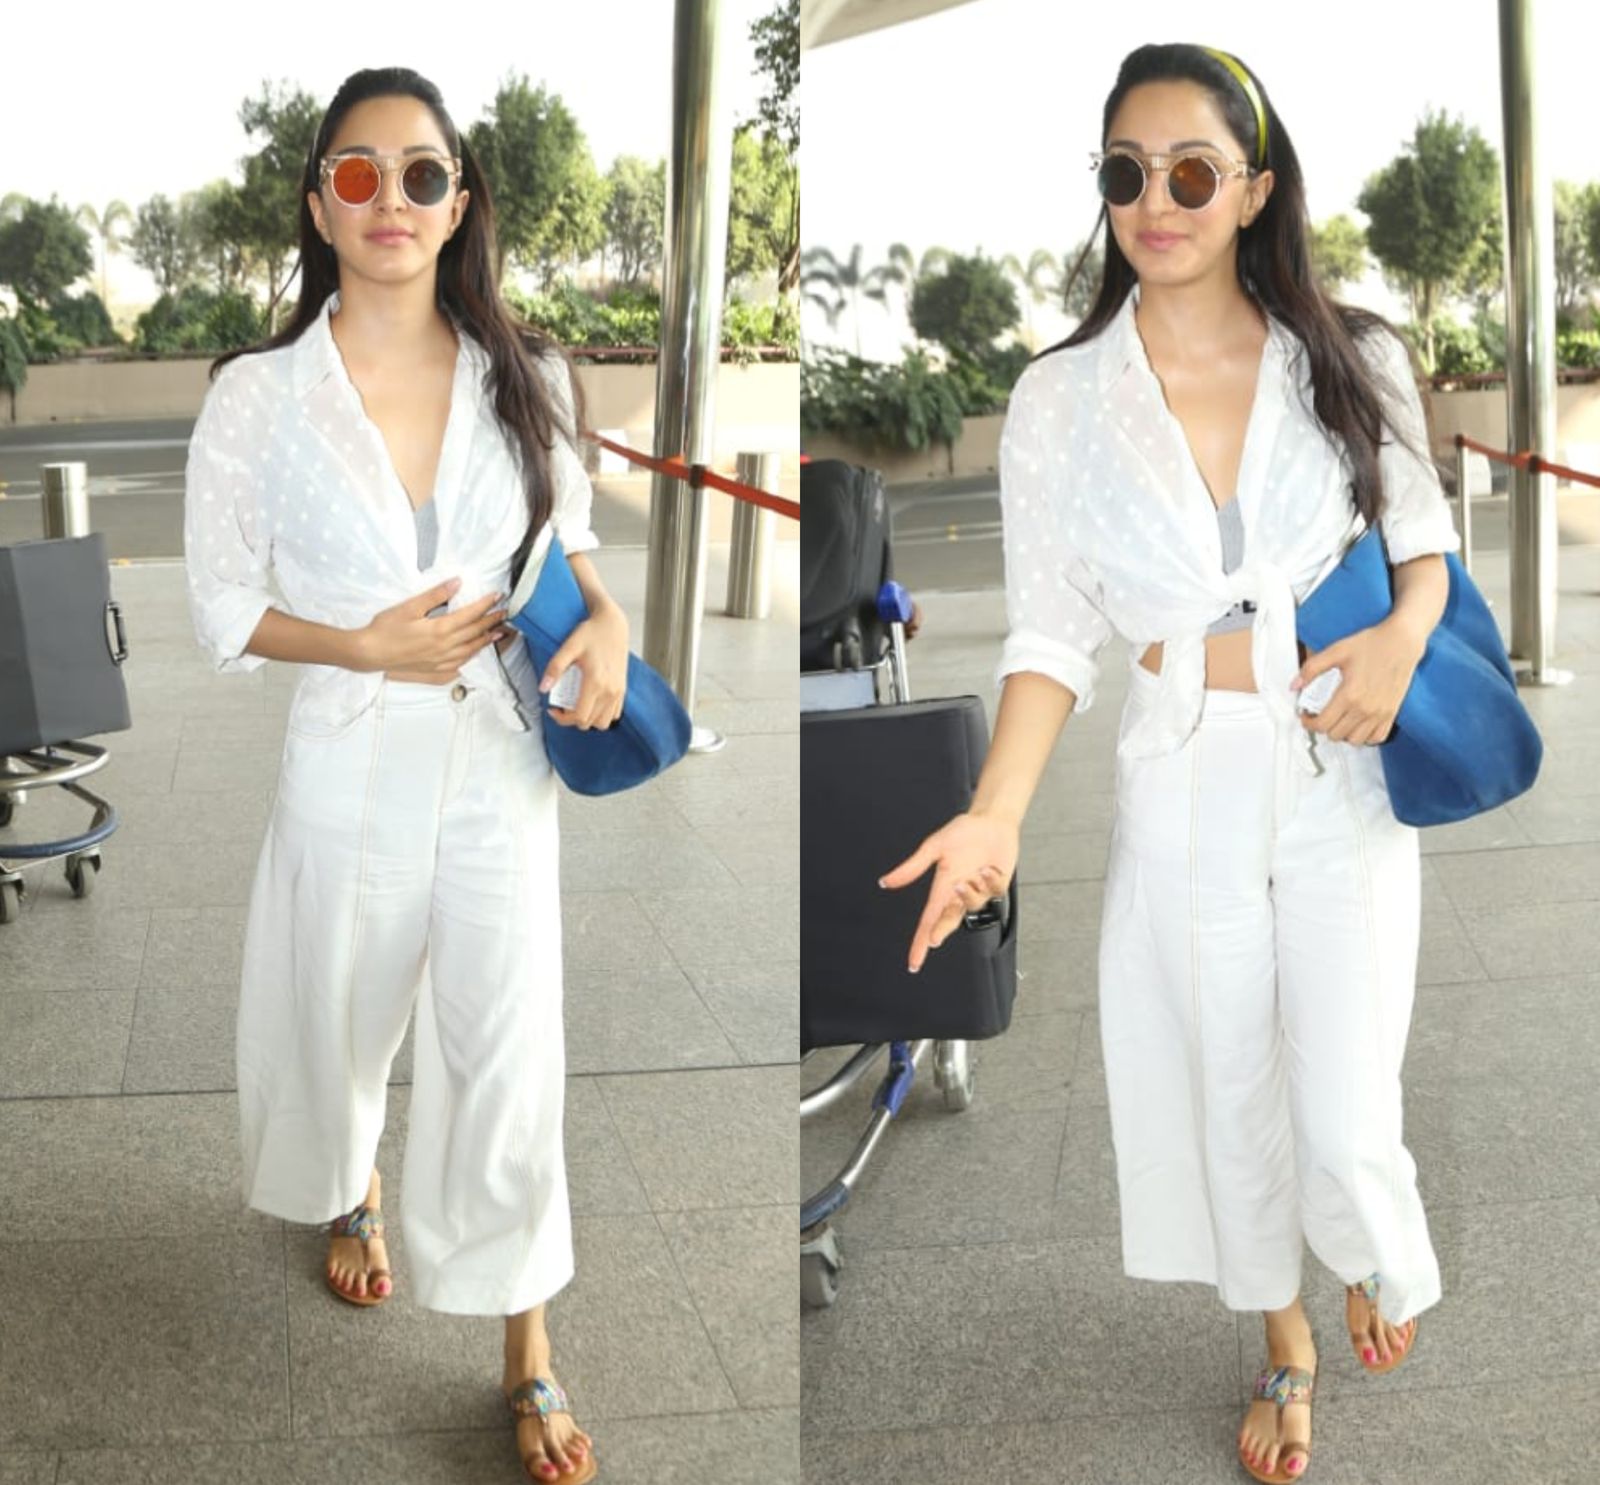 Kiara Advani Looks Gorgeous In A Boho Chic Outfit At The Airport; Get ...